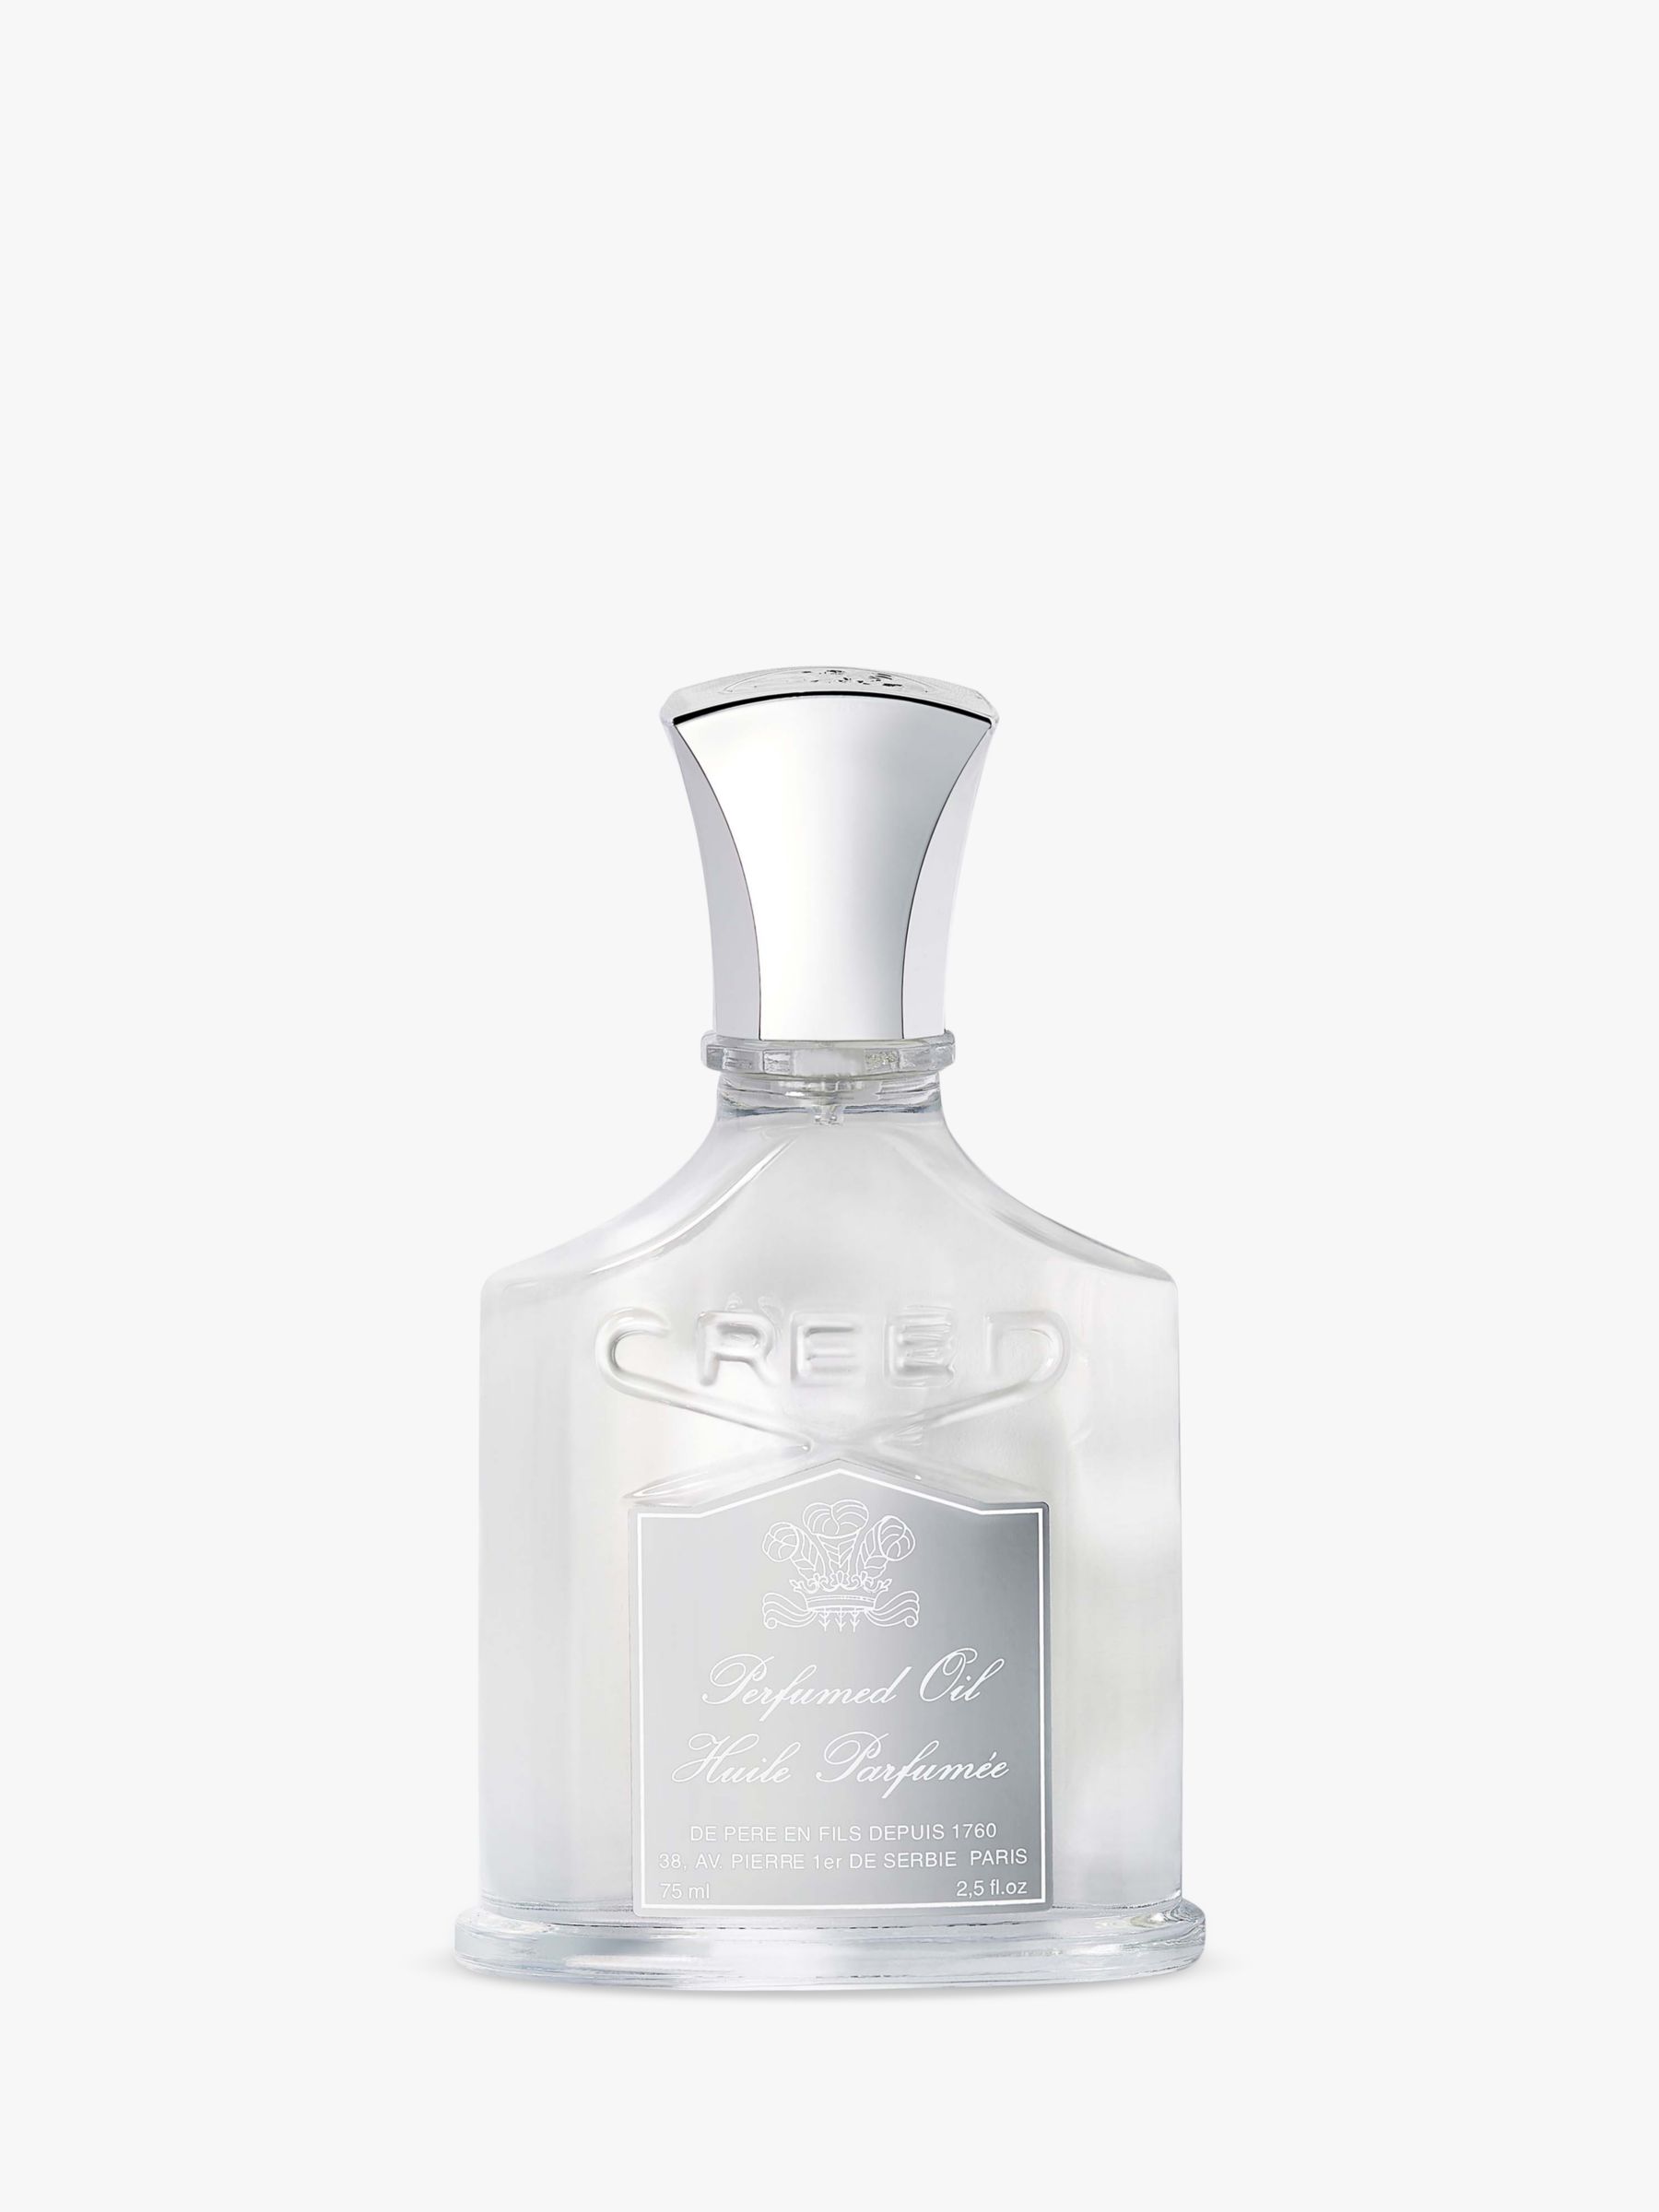 CREED Aventus For Her Body Oil Spray, 75ml at John Lewis & Partners